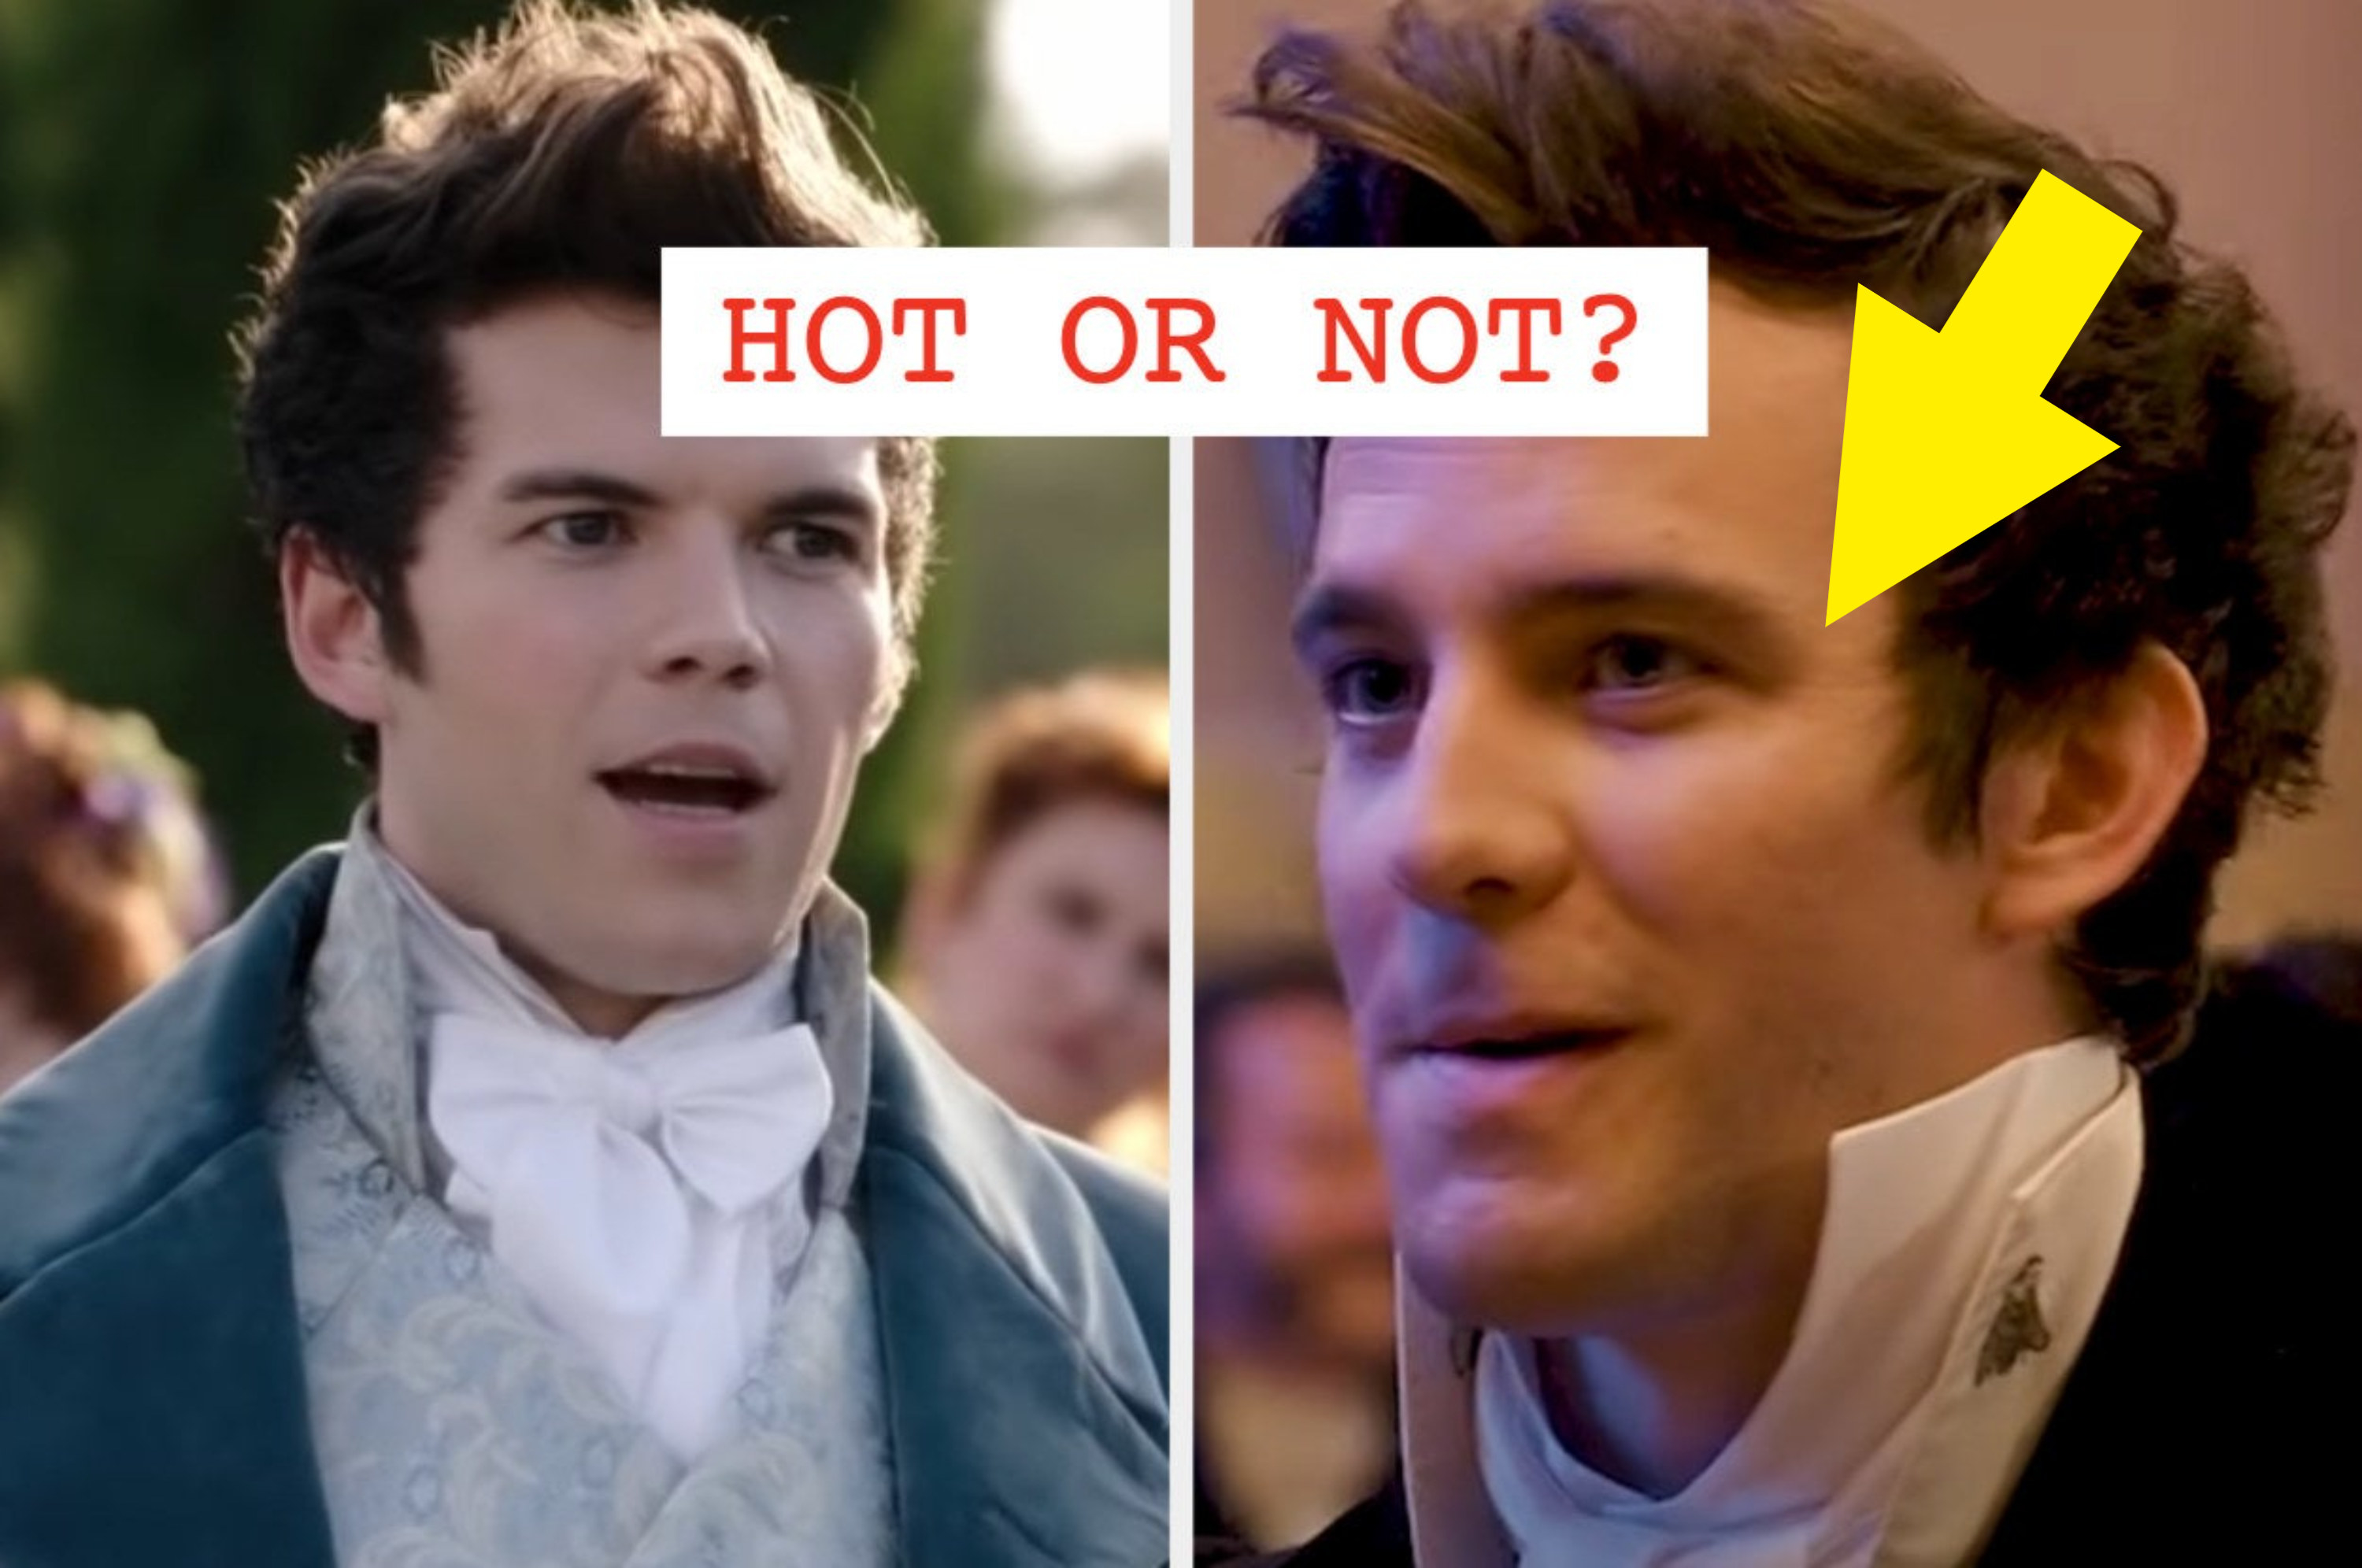 Hot or not: Colin or Benedict?